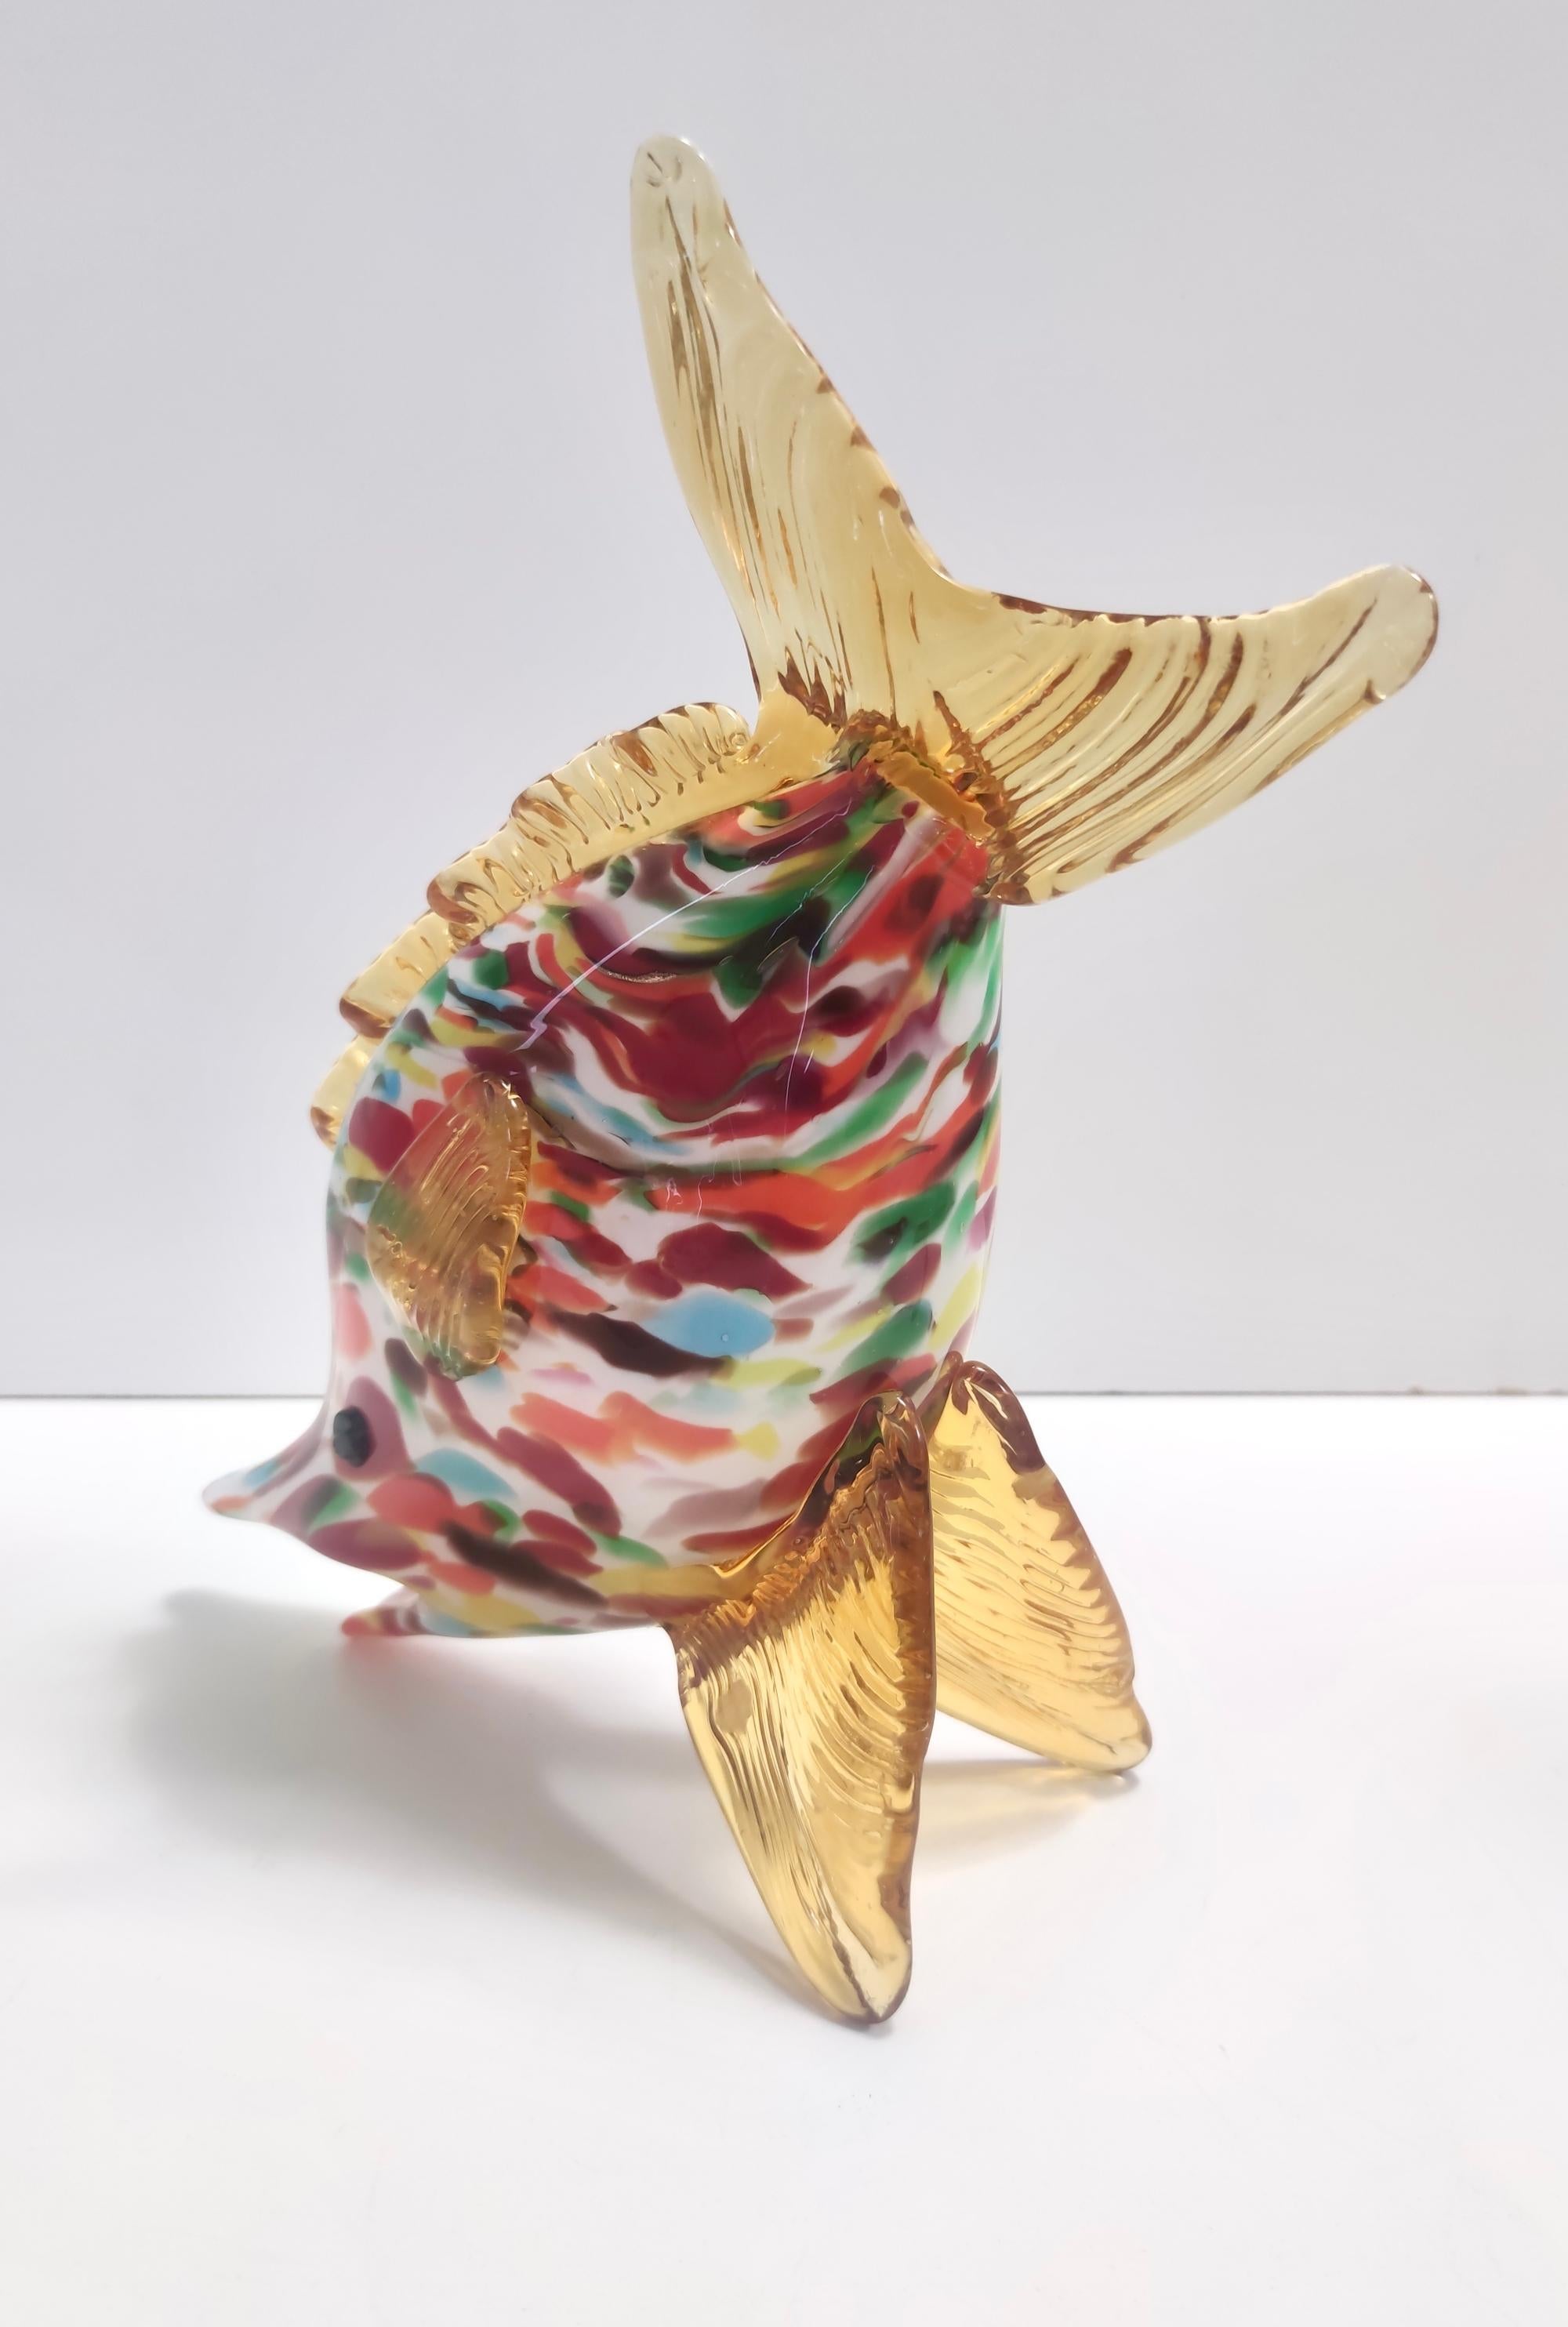 Vintage Multicolored Murano Glass Fish Decorative Figurine by Fratelli Toso In Excellent Condition For Sale In Bresso, Lombardy